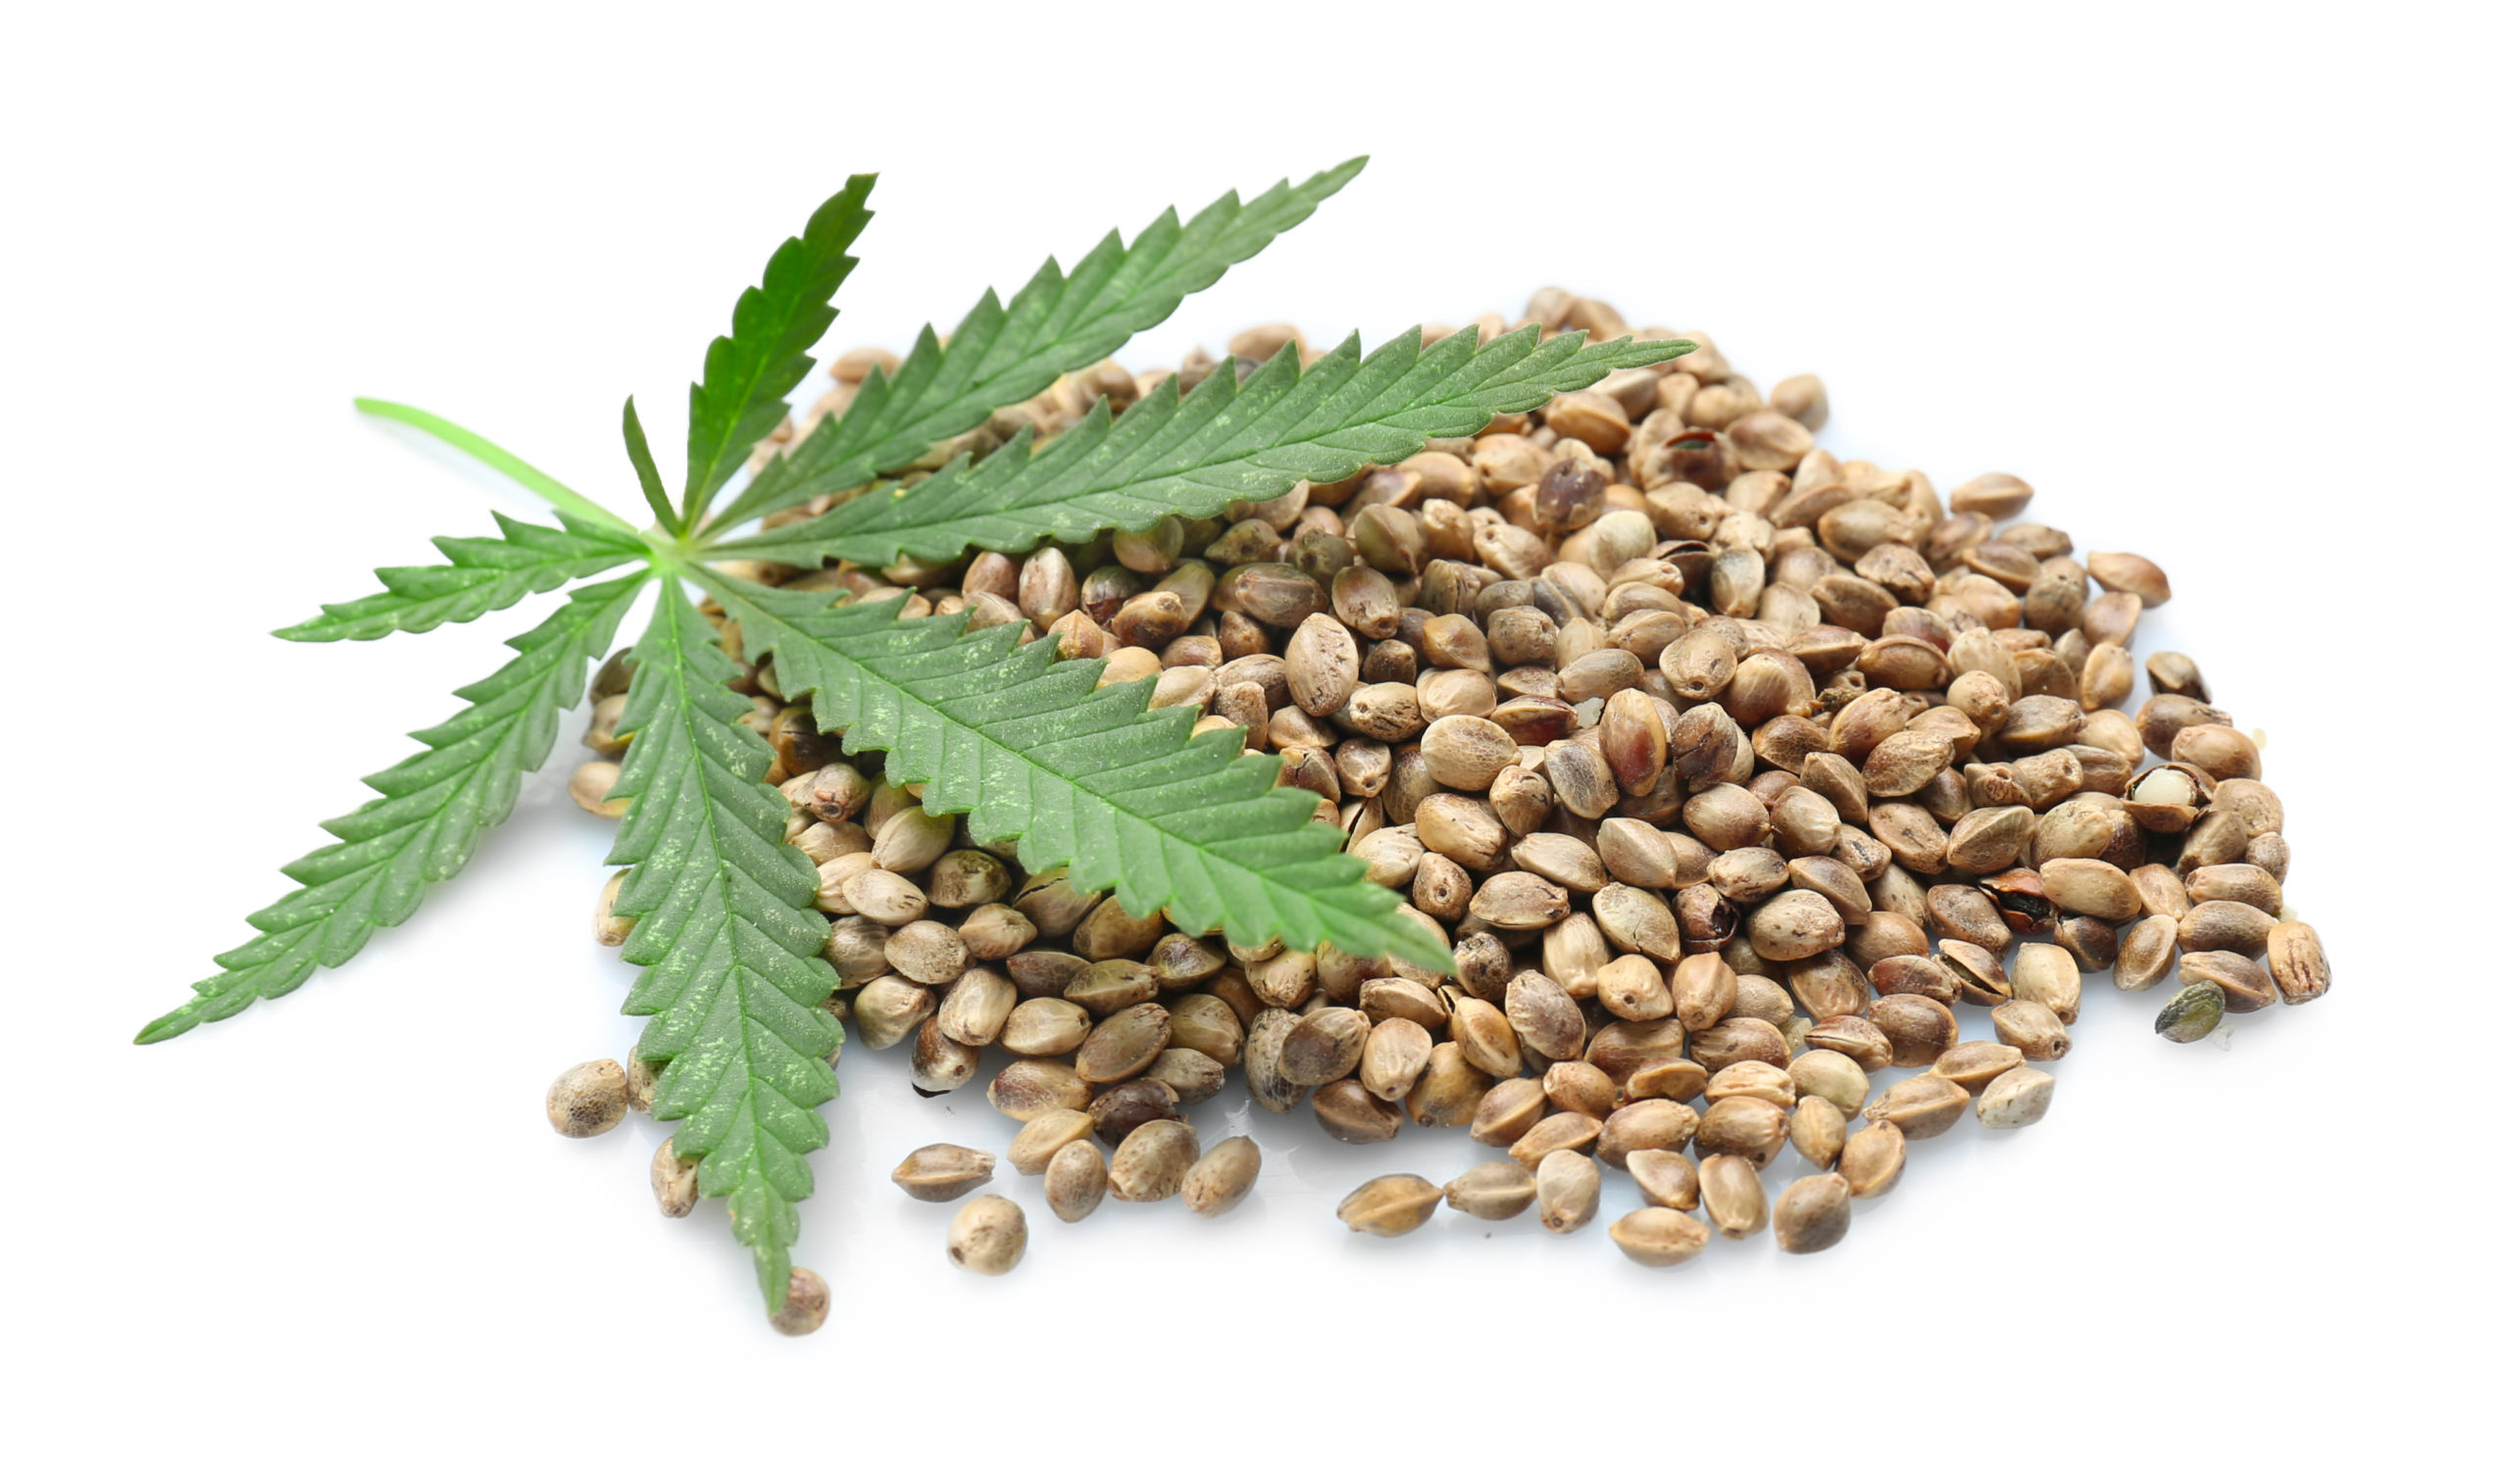 Are Weed Seeds Illegal In Missouri 